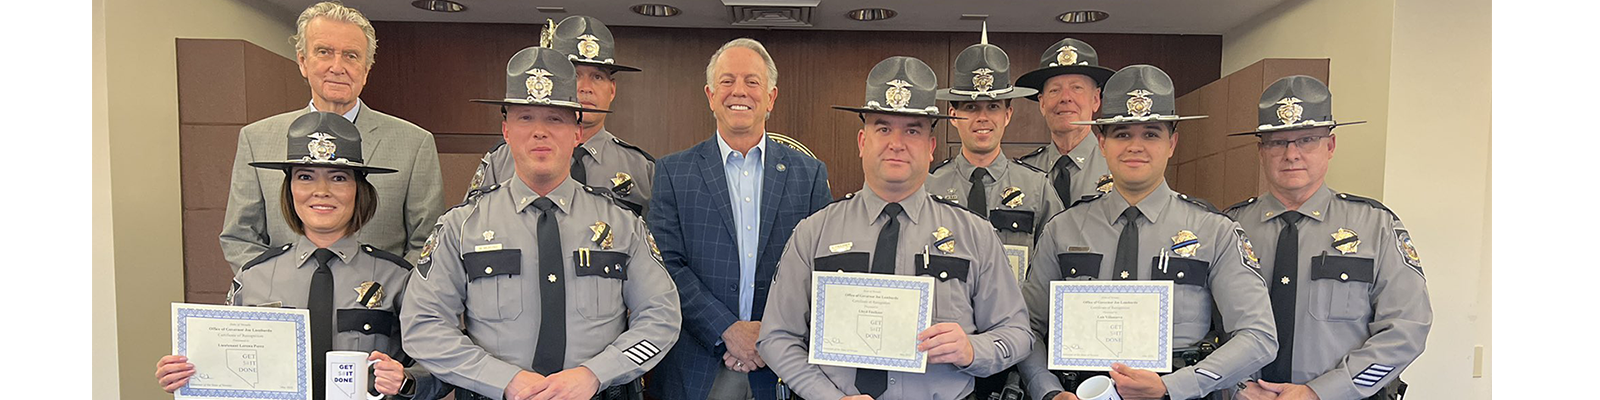 Governor Lombardo handing out Get Sh*t Done Awards to Nevada State Police Officers